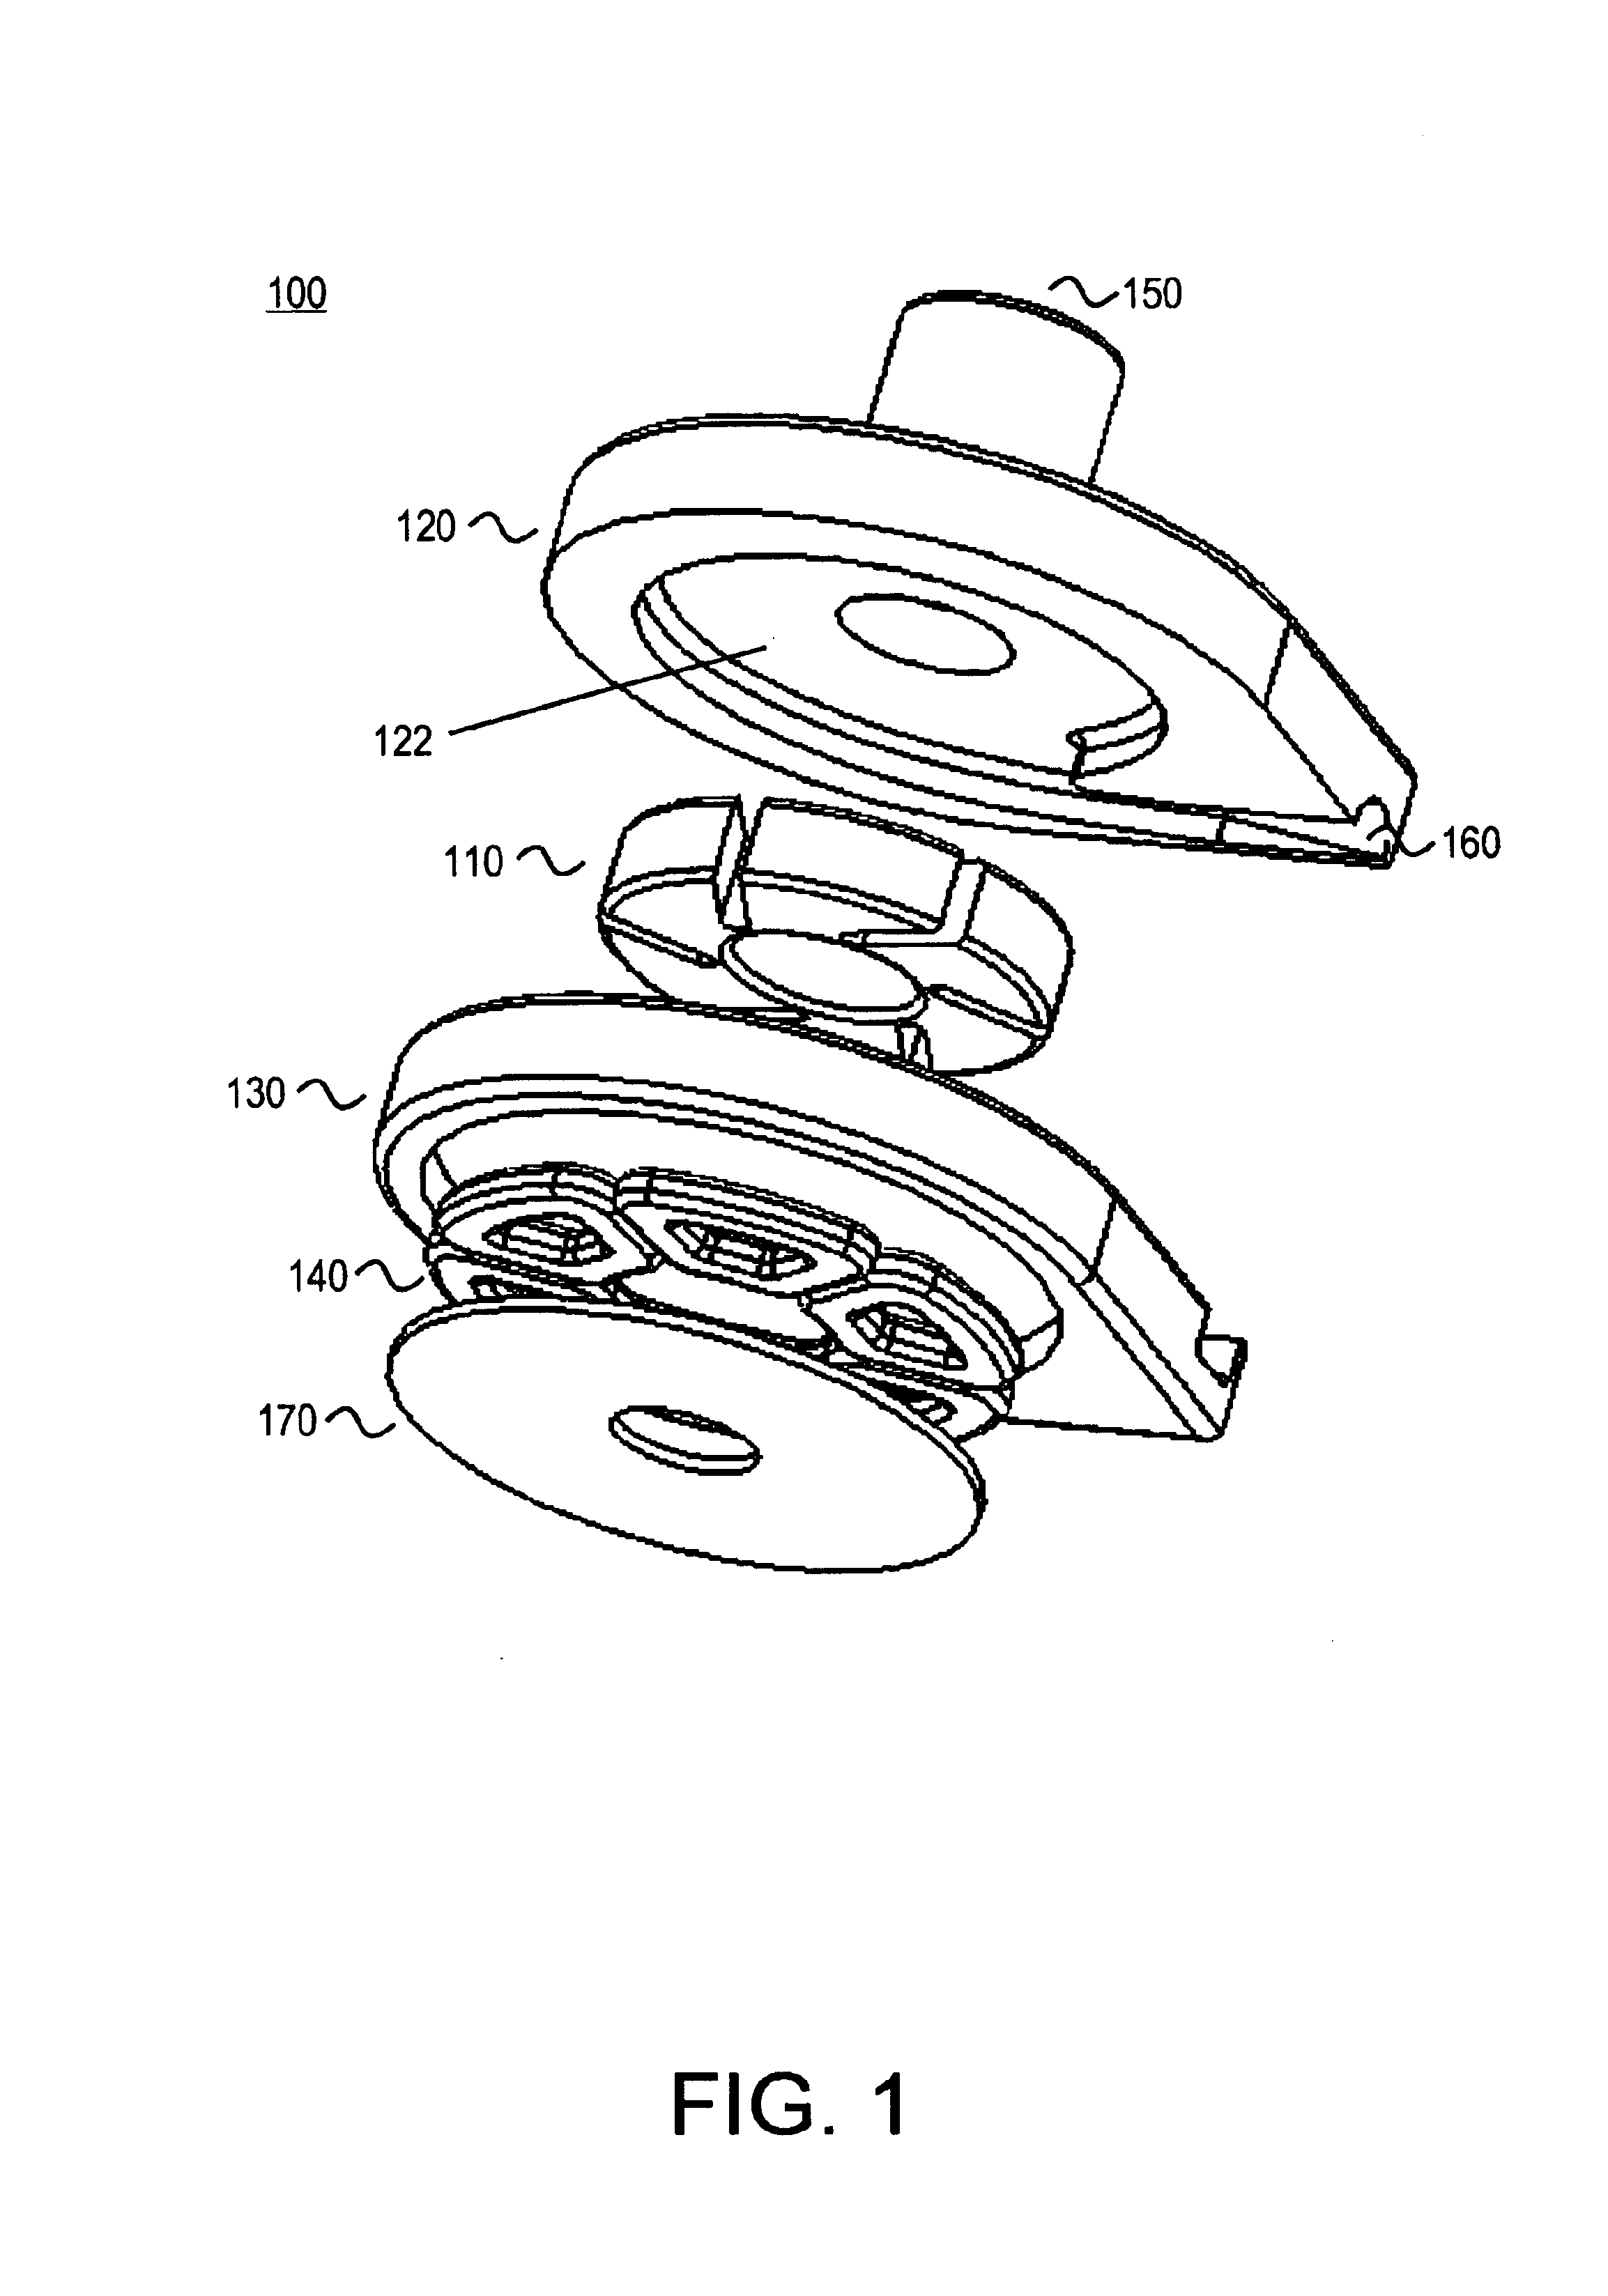 Pump with an electrodynamically supported impeller and a hydrodynamic bearing between the impeller and the stator